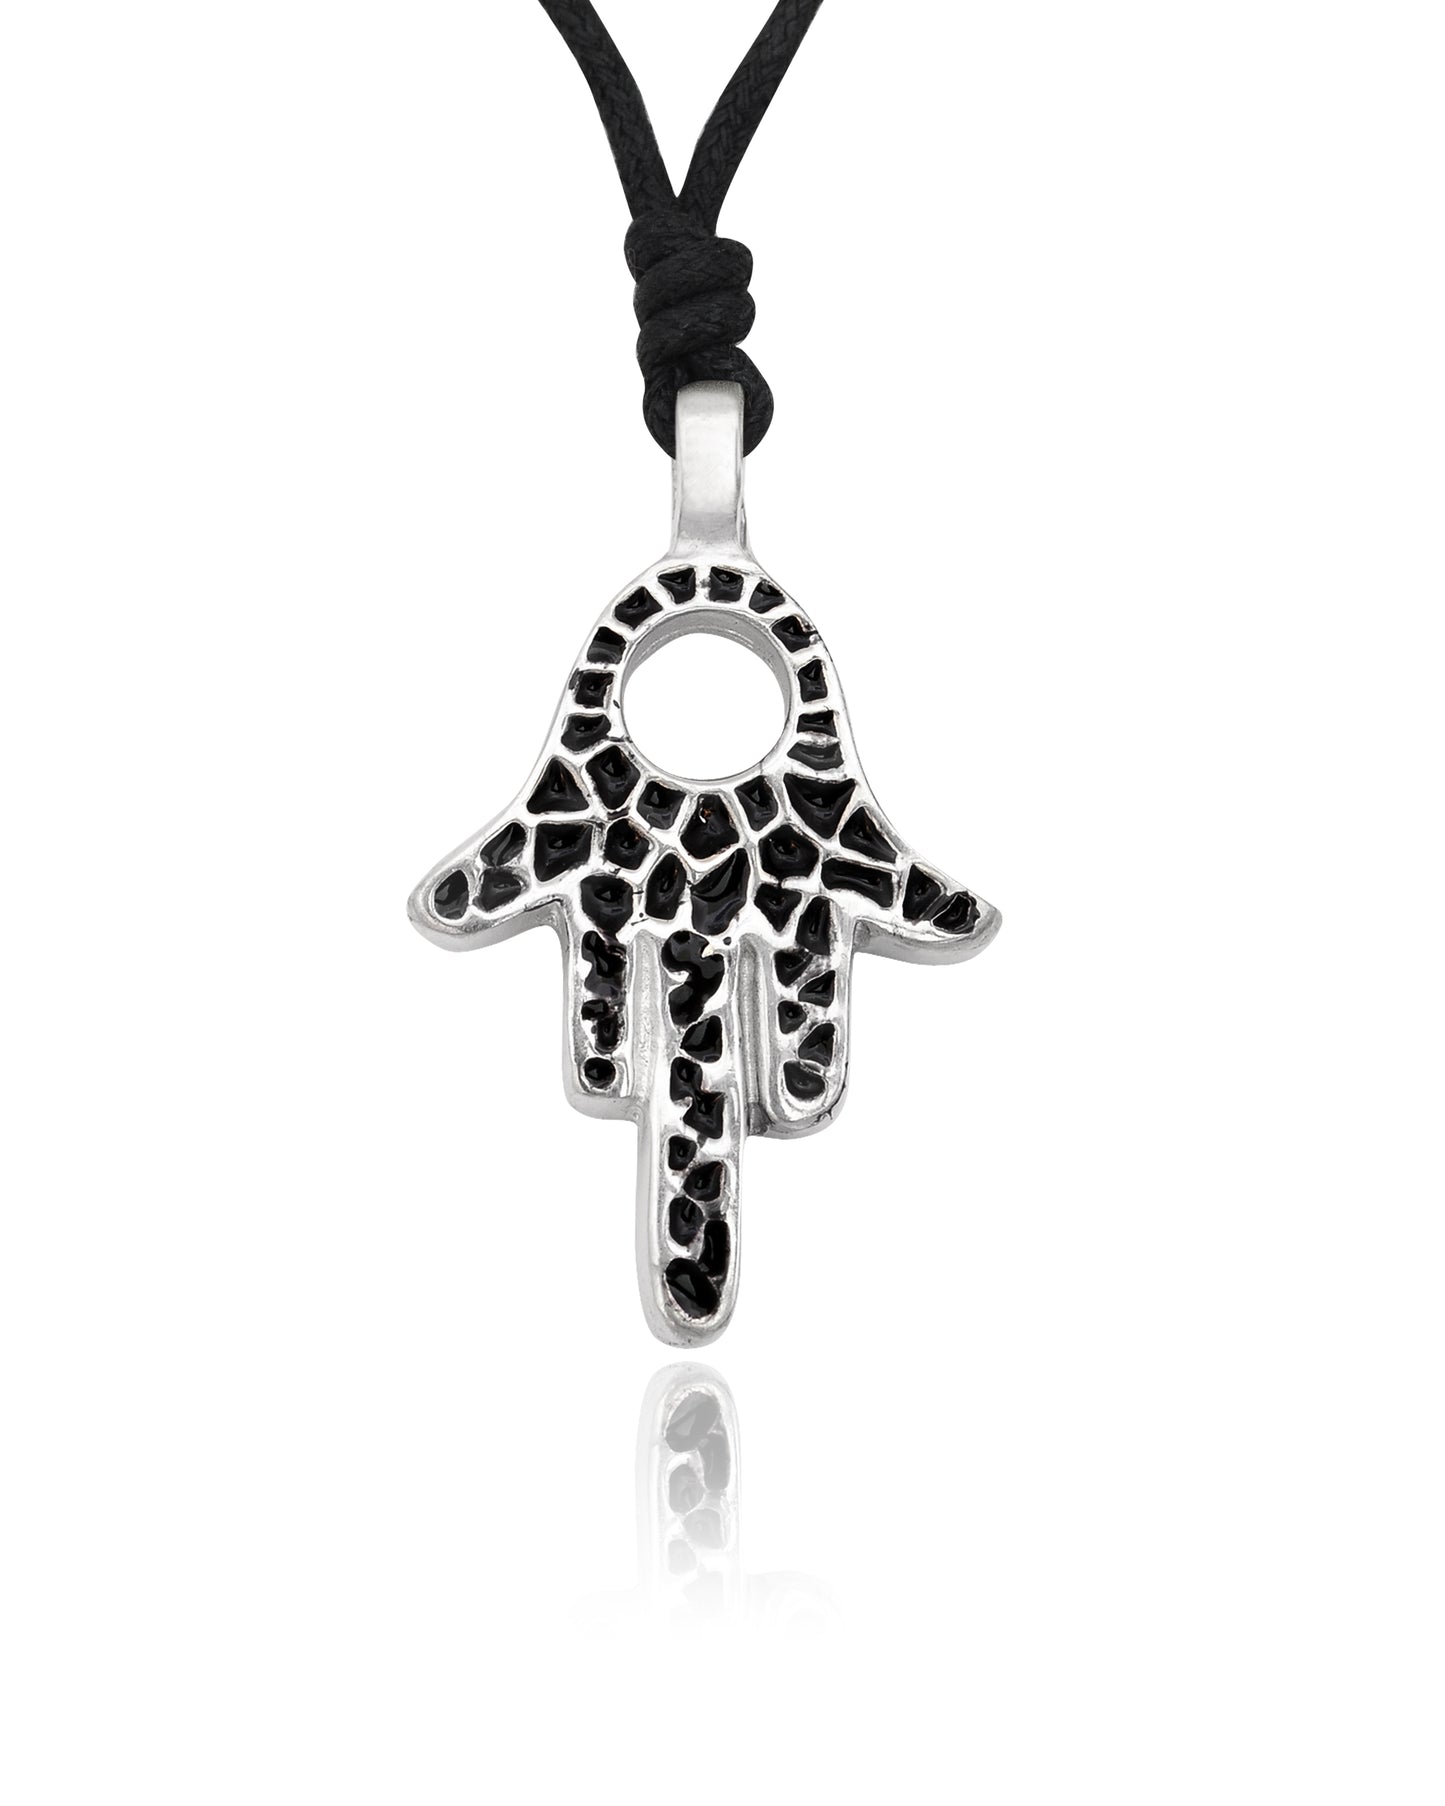 Hamsa (Hand of God) Silver Pewter Necklace Pendant Jewelry